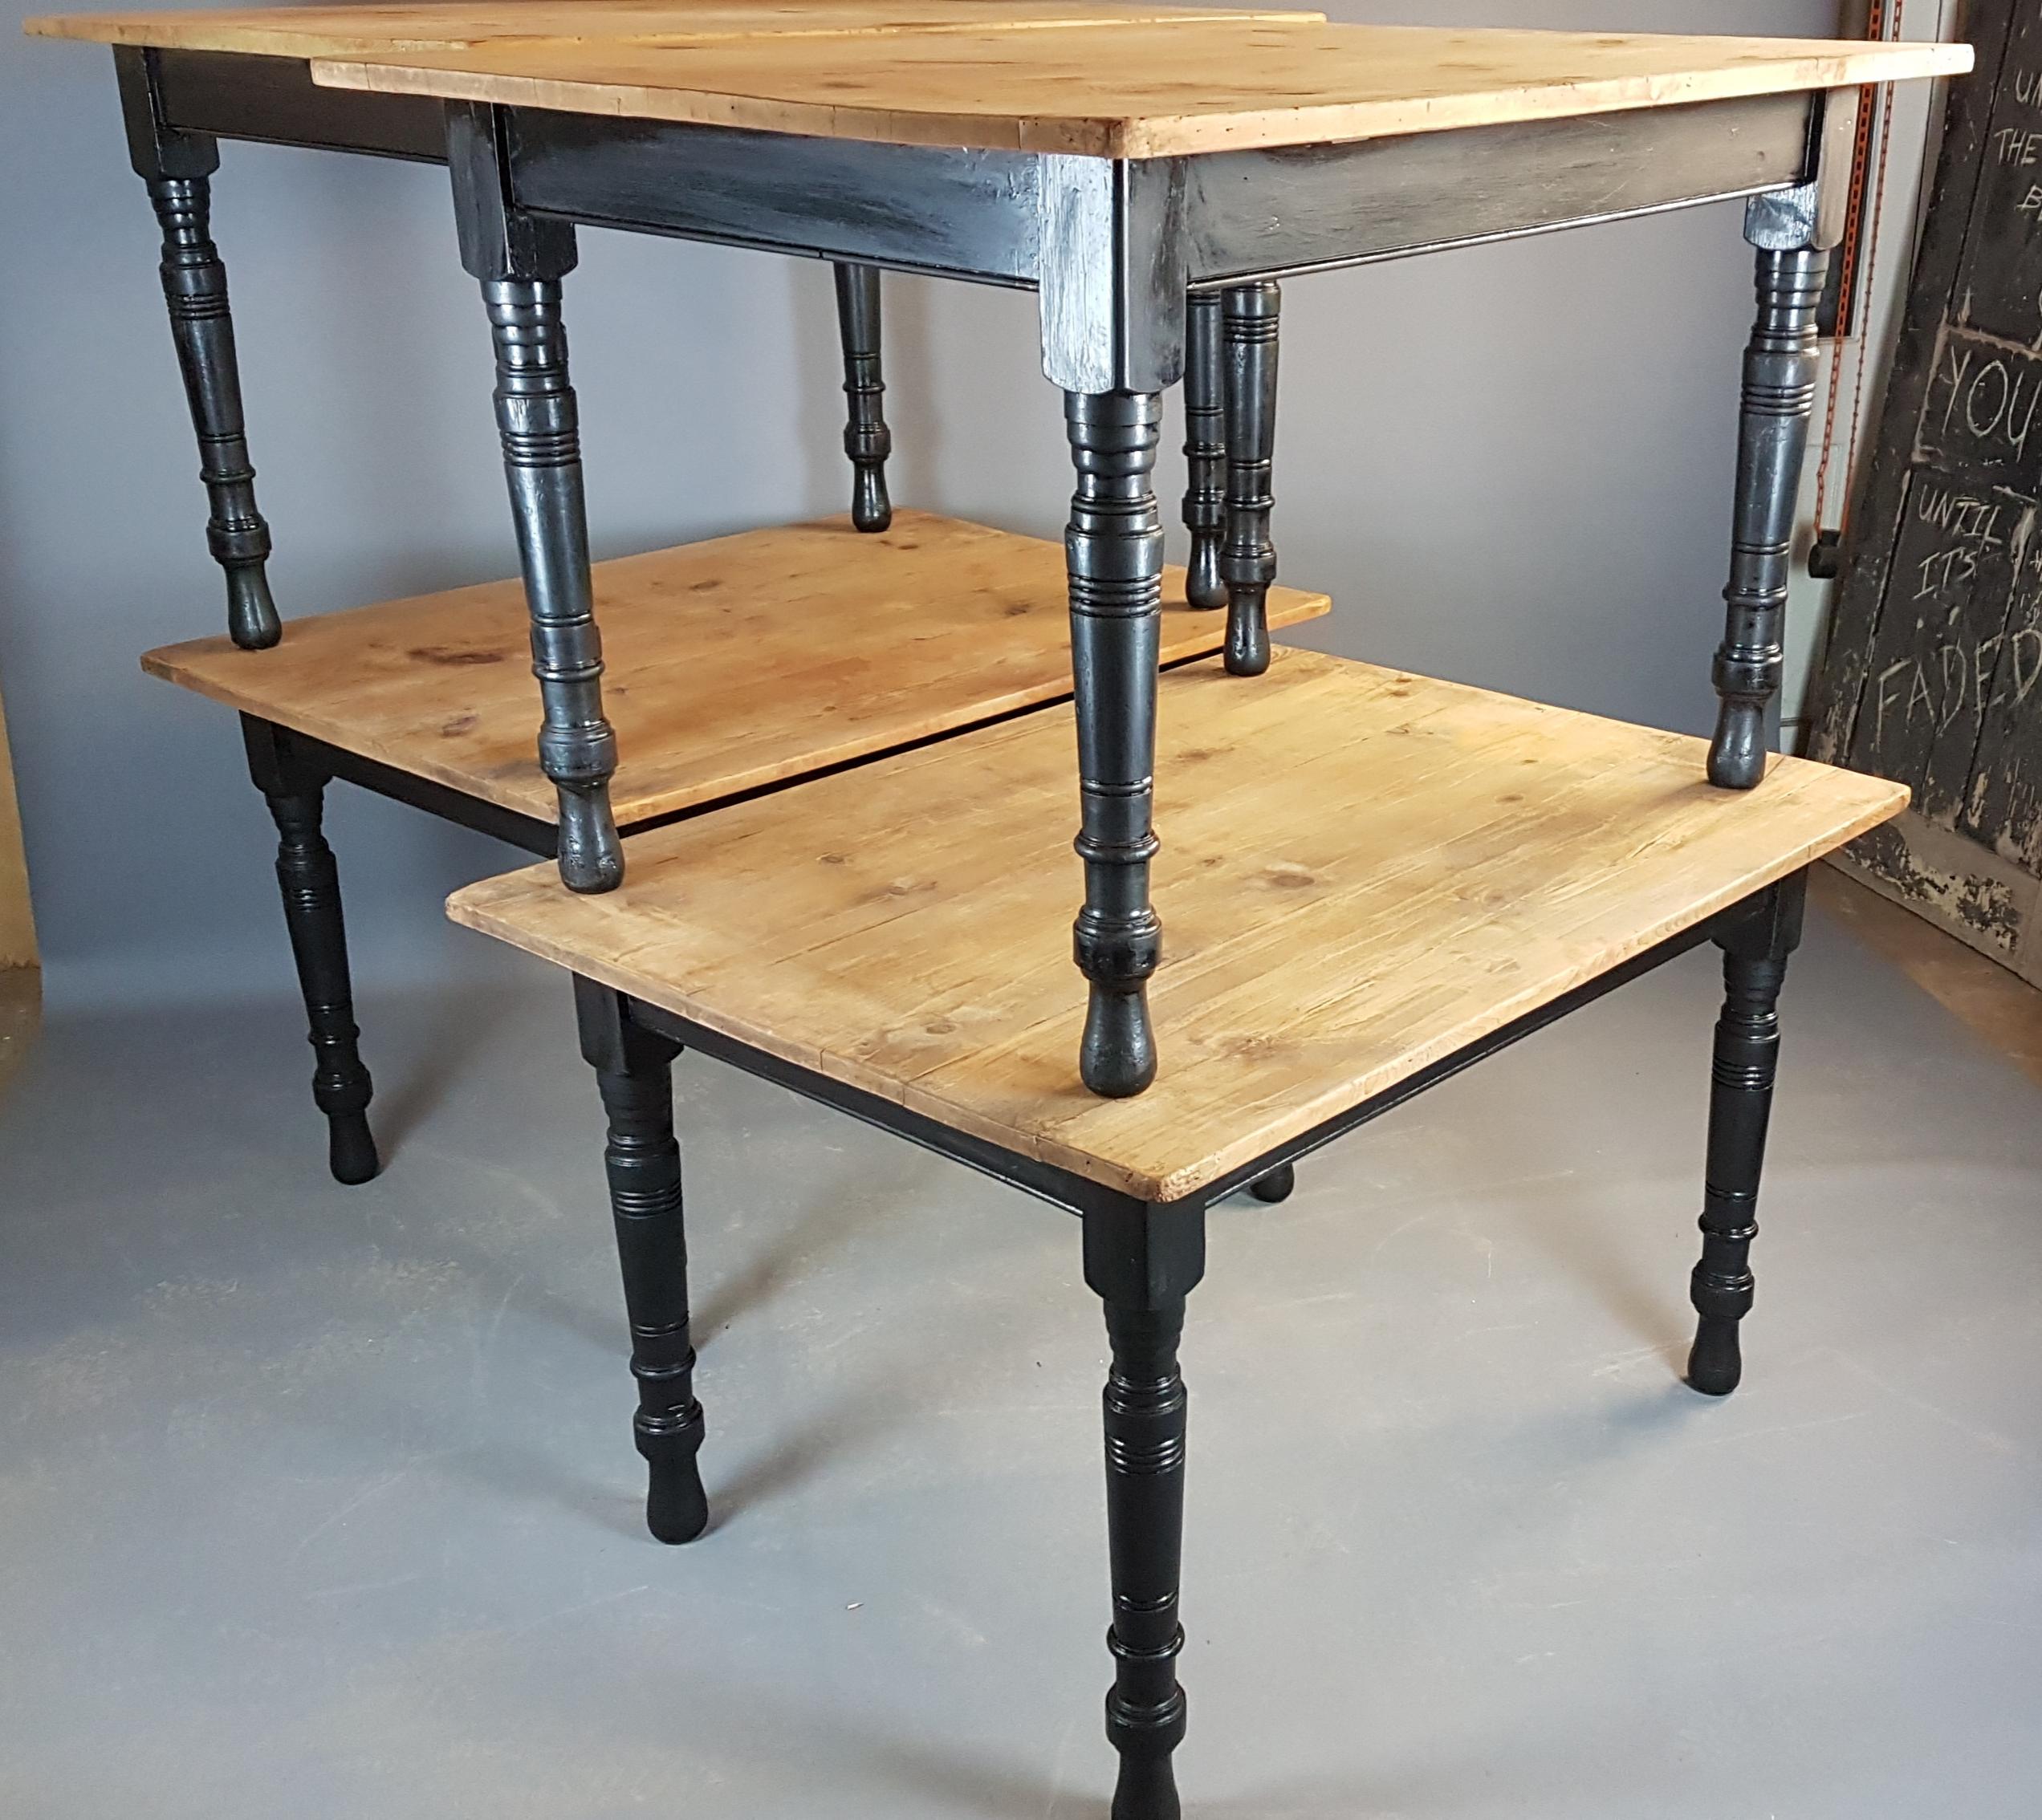 A rare set of 4 early 20th century painted pine tables, each being identical in design and measurement.

They have black painted bases and dry scrub top tops that still retain the original hand planing marks as they were covered for all these